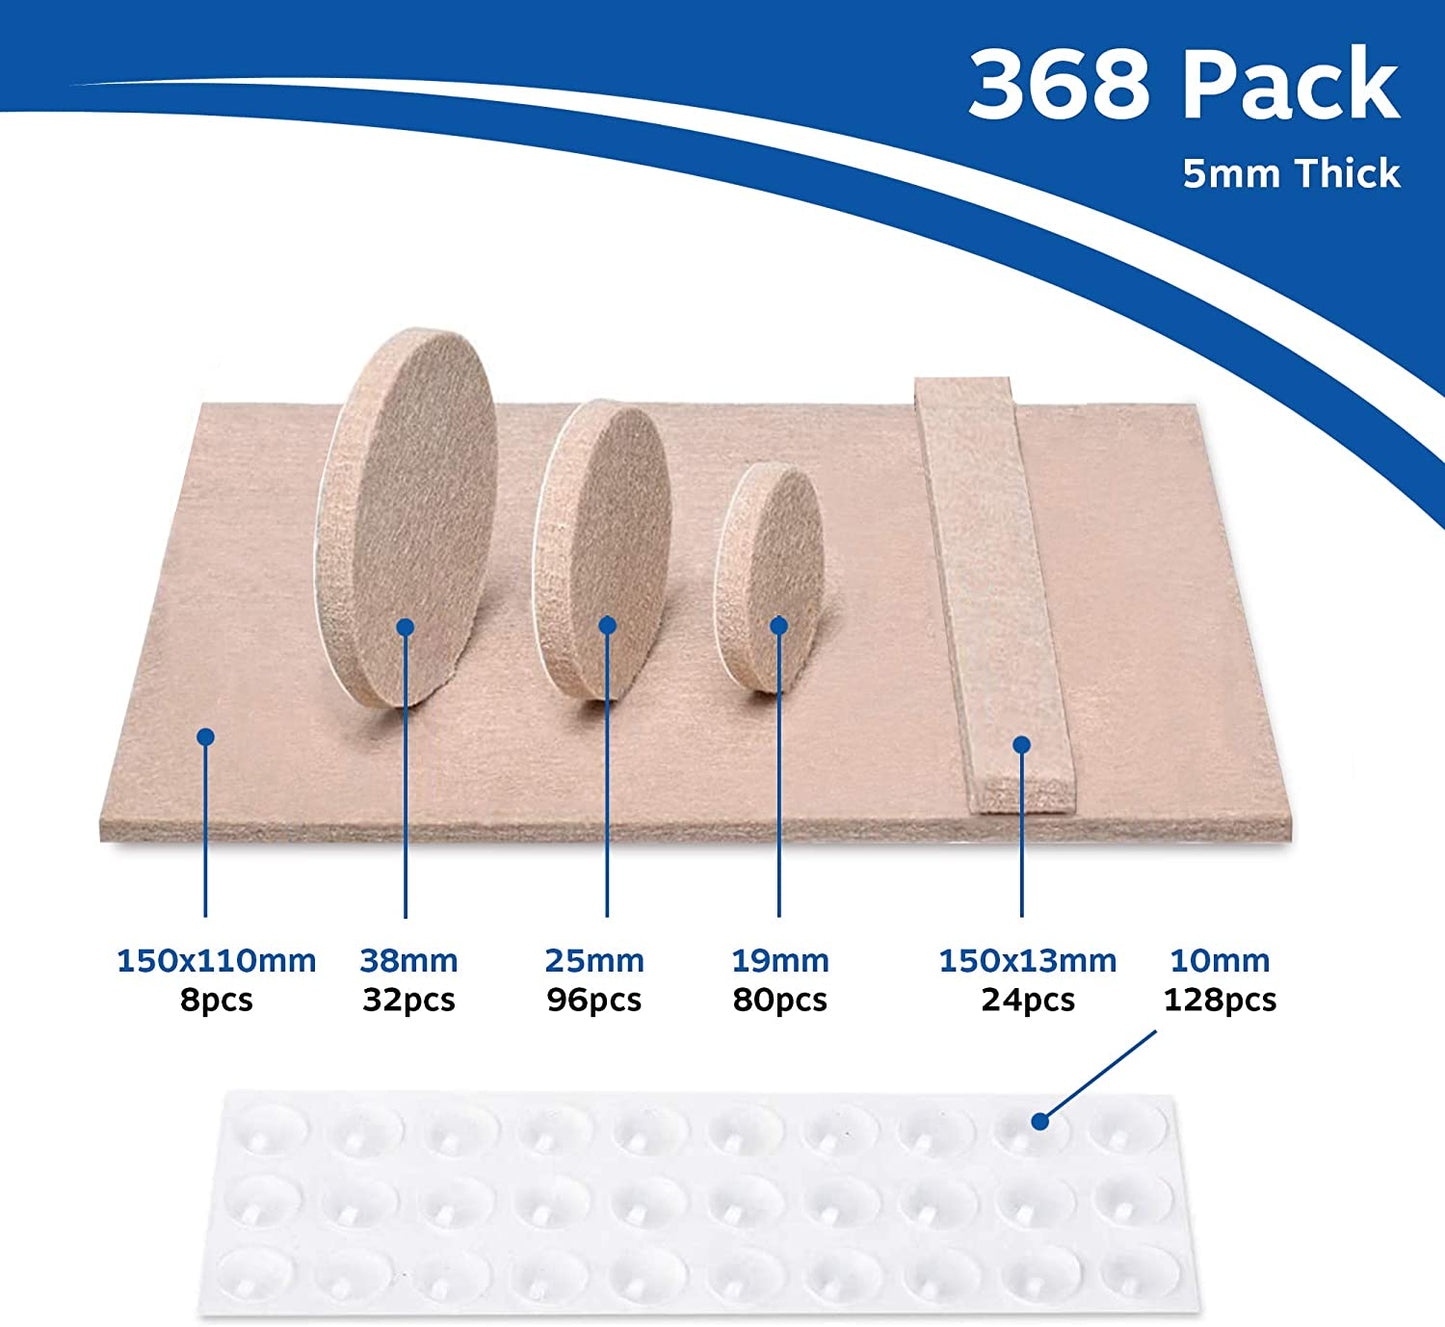 Felt pads for furniture feet 368 pack with clear rubber feet. Beige Chair leg floor protectors. Heavy duty furniture pads with strong adhesion.